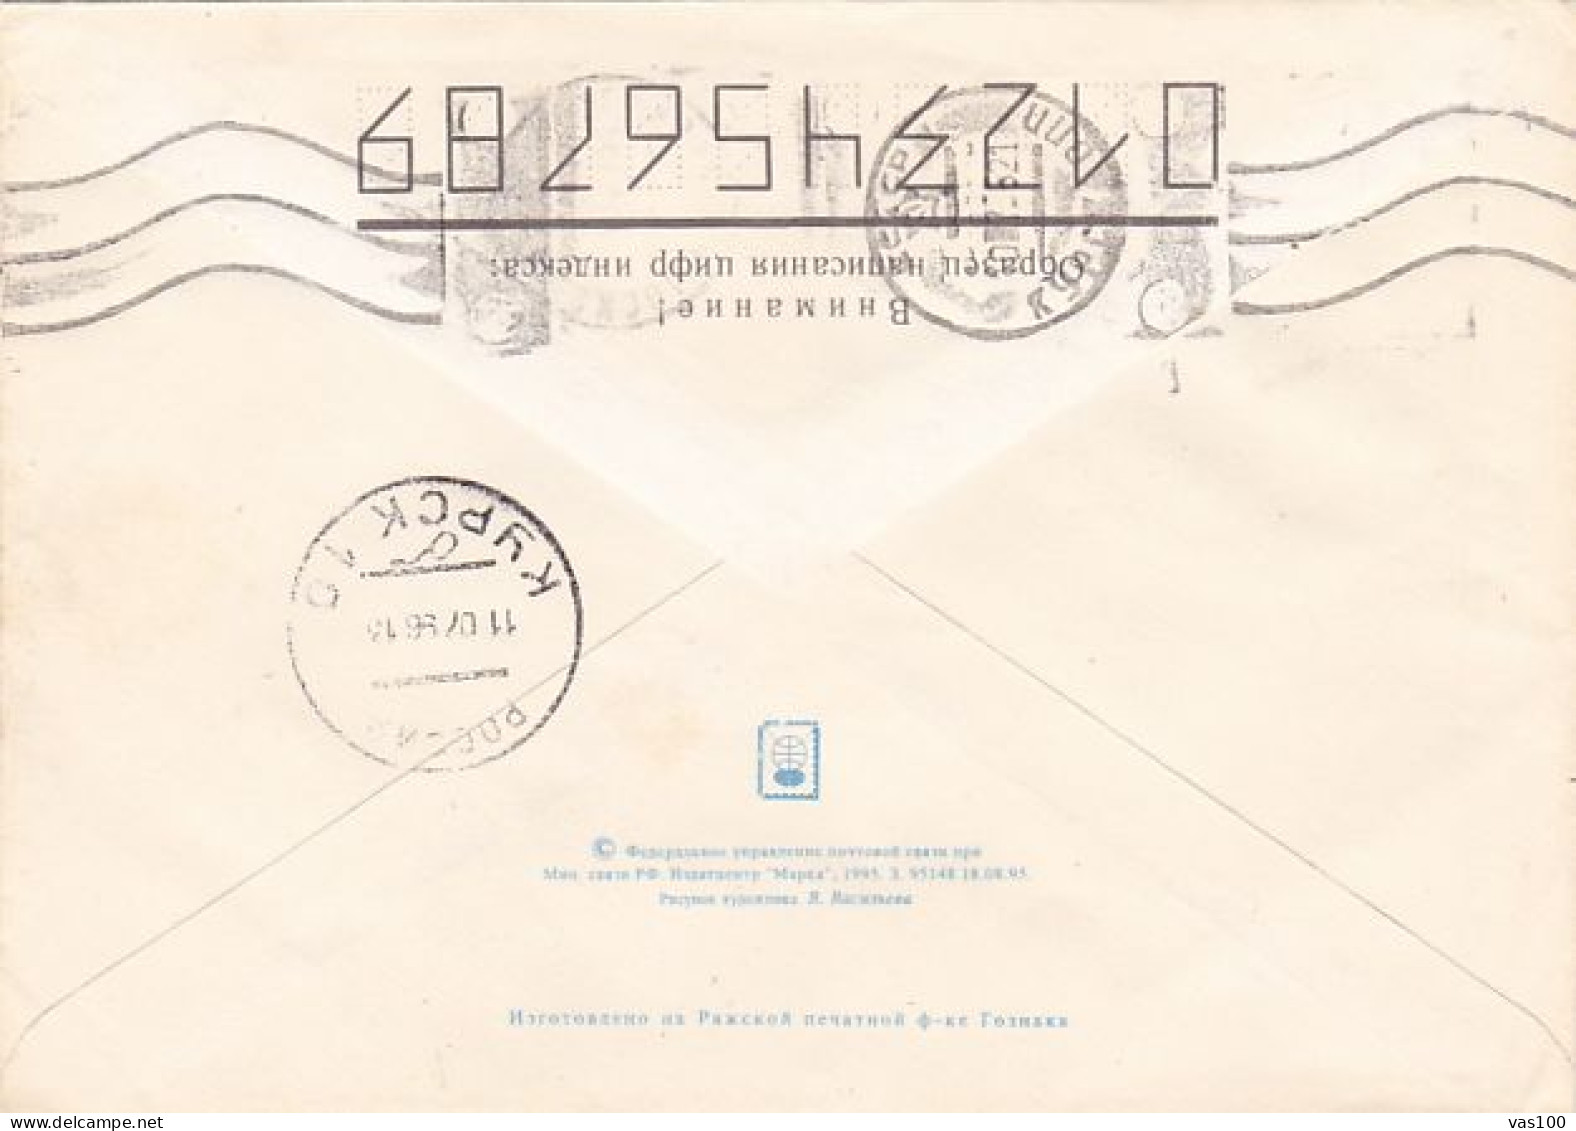 MOSCOW METROPOLITAN SUBWAY, STATION, COVER STATIONERY, ENTIER POSTAL, 1995, RUSSIA - Entiers Postaux